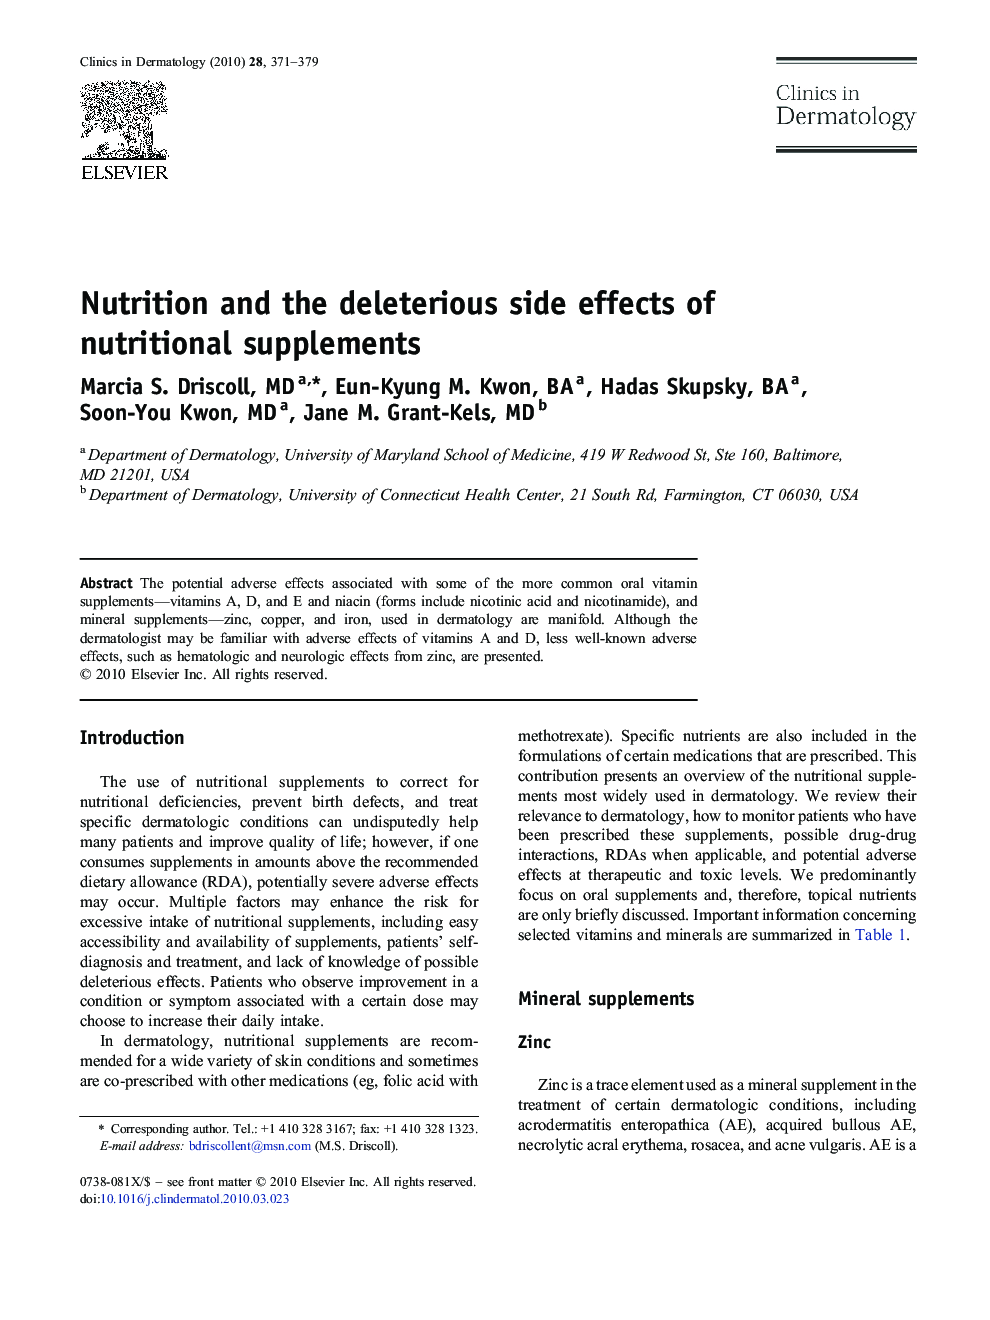 Nutrition and the deleterious side effects of nutritional supplements